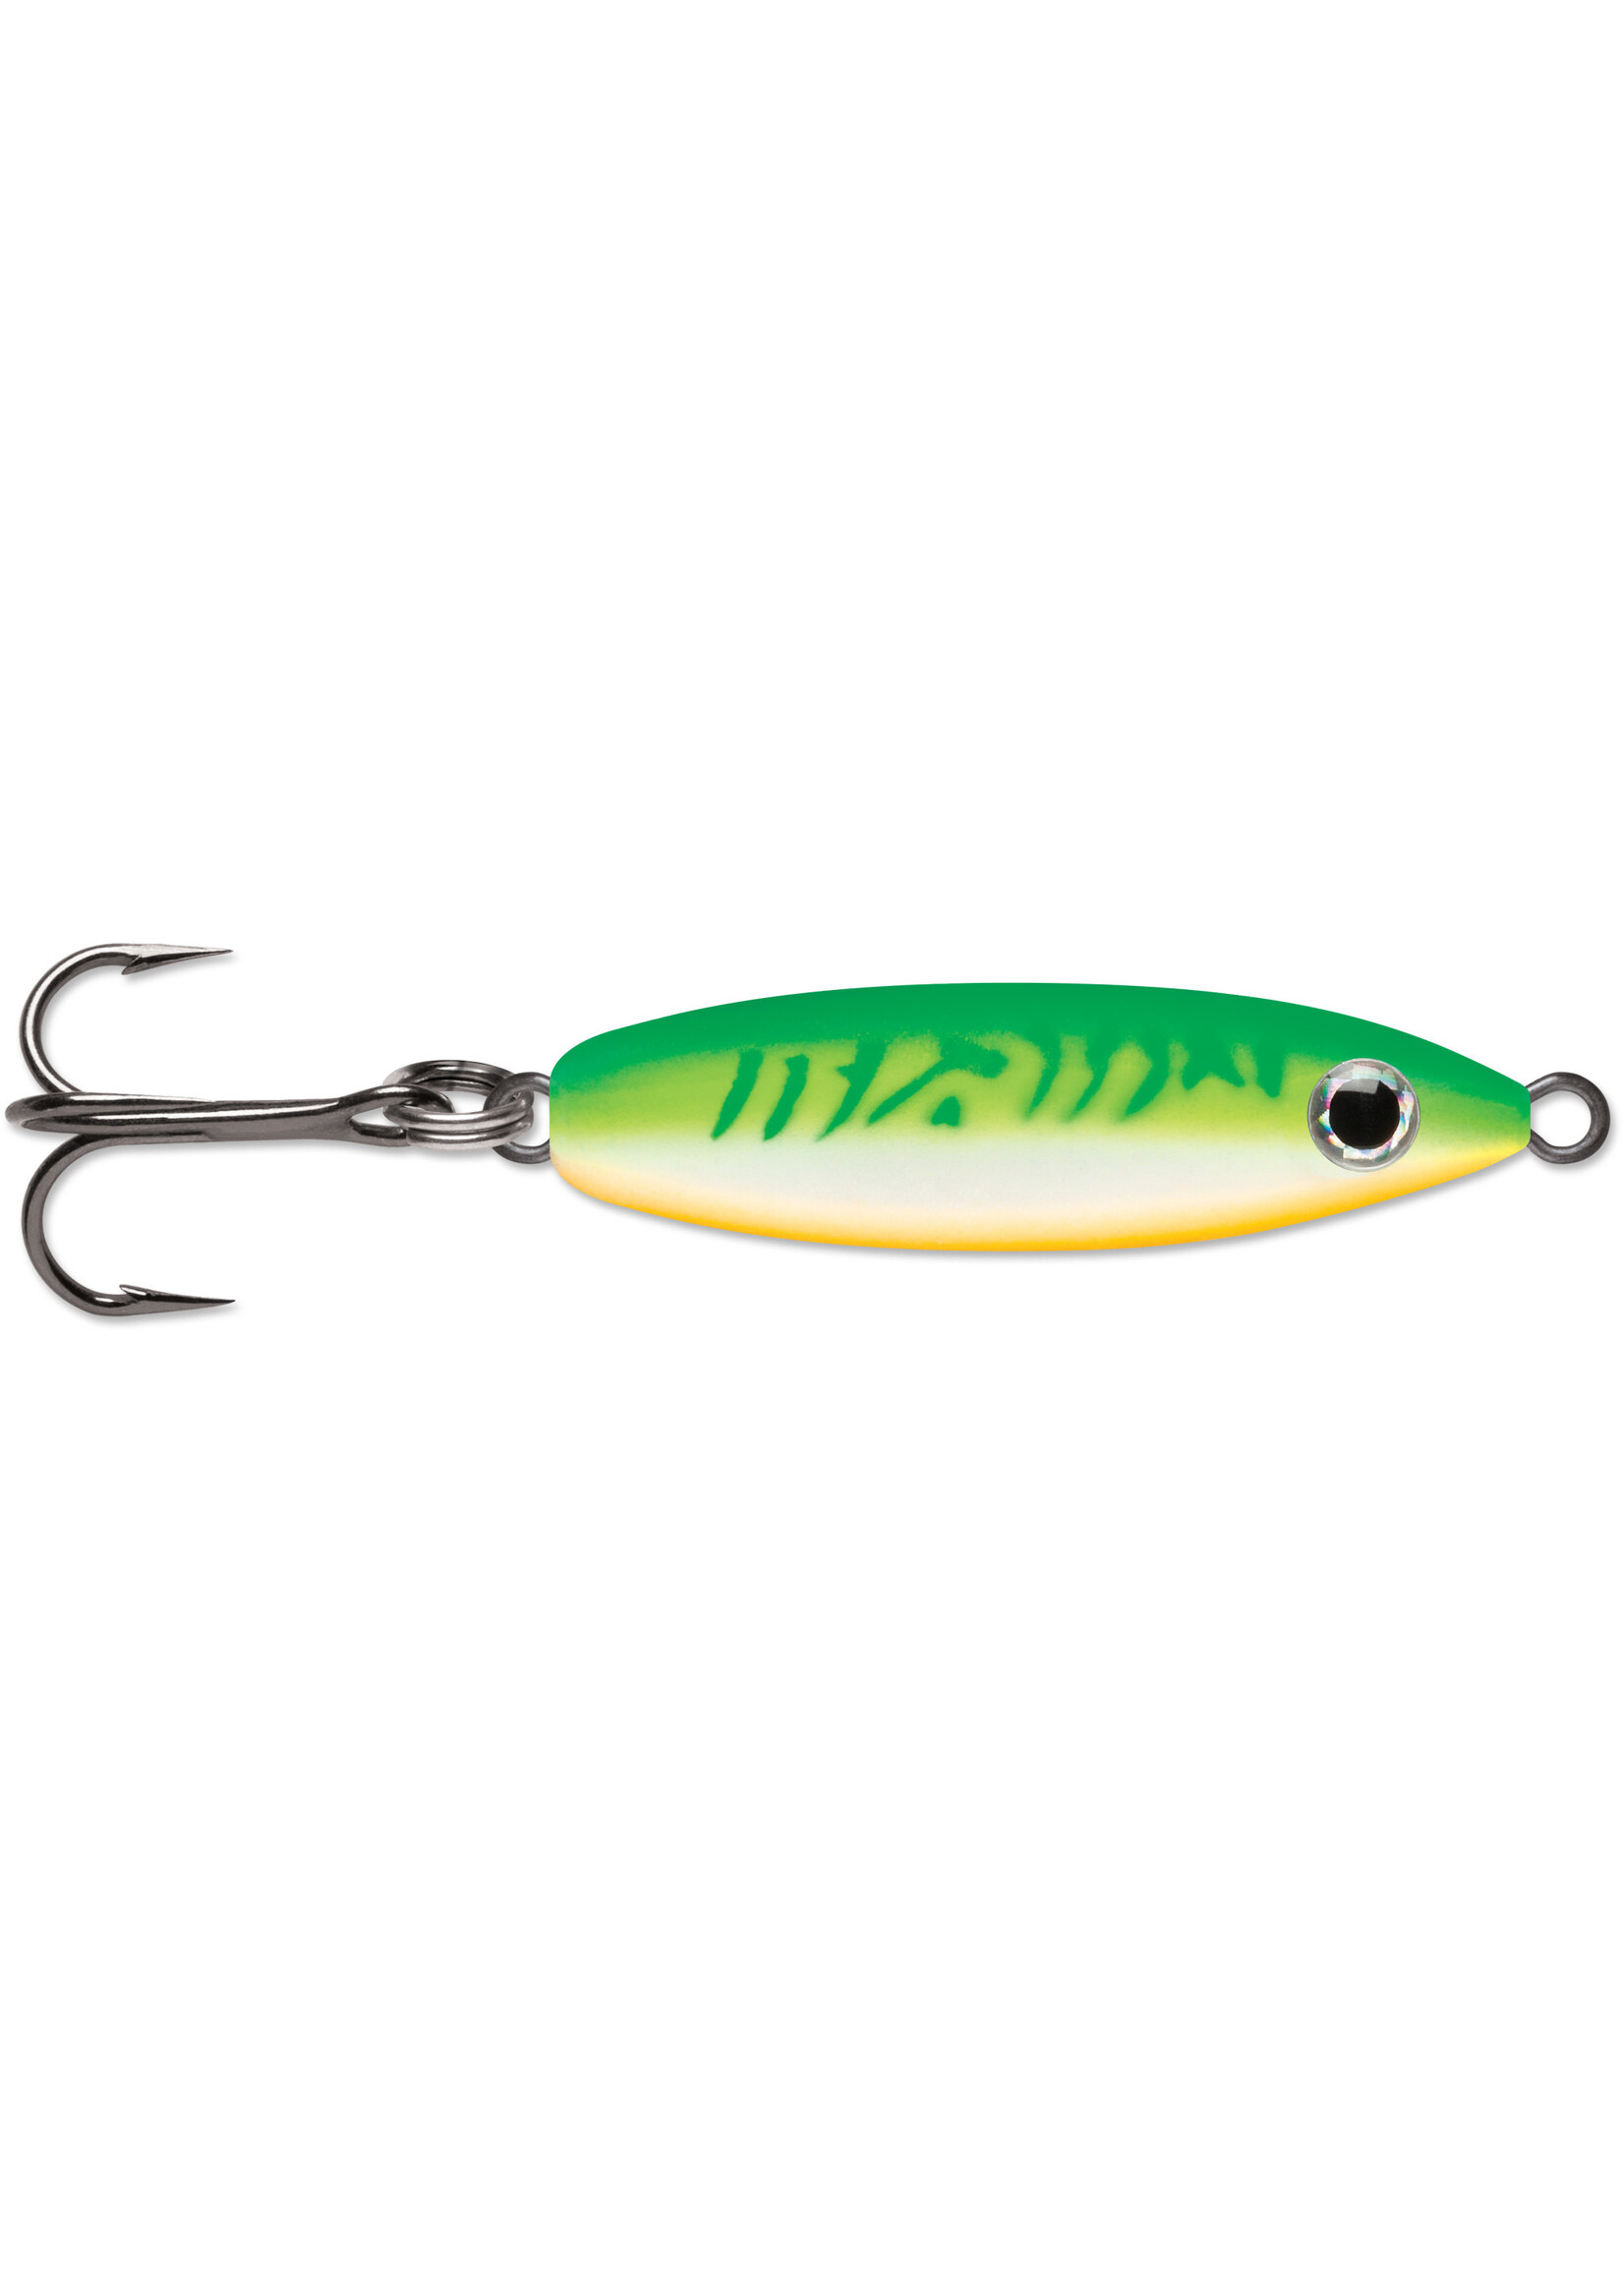 VMC Rattle Spoon - Tackle Shack